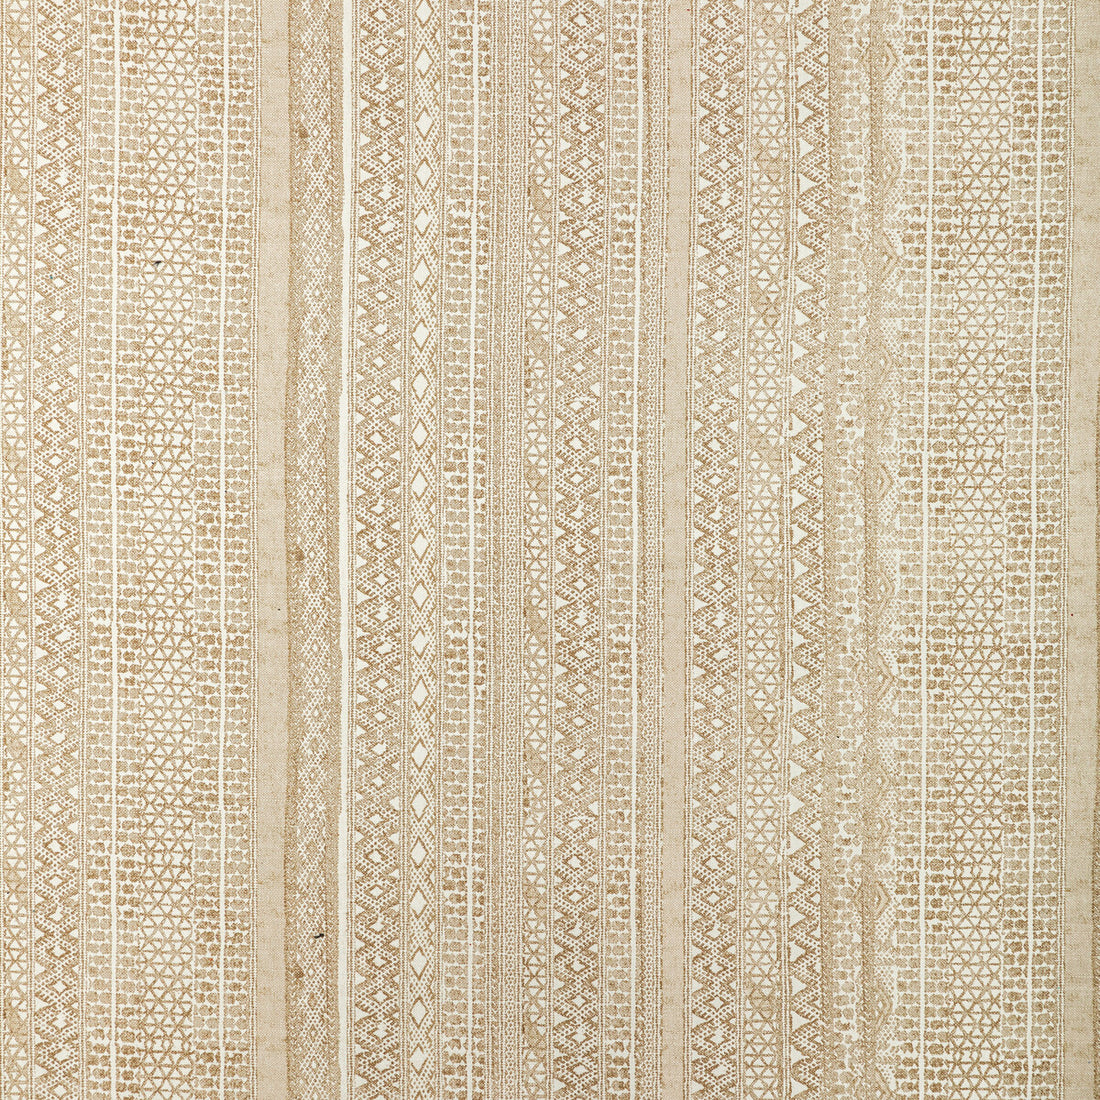 Hakan fabric in flax color - pattern 2012100.16.0 - by Lee Jofa in the Breckenridge collection